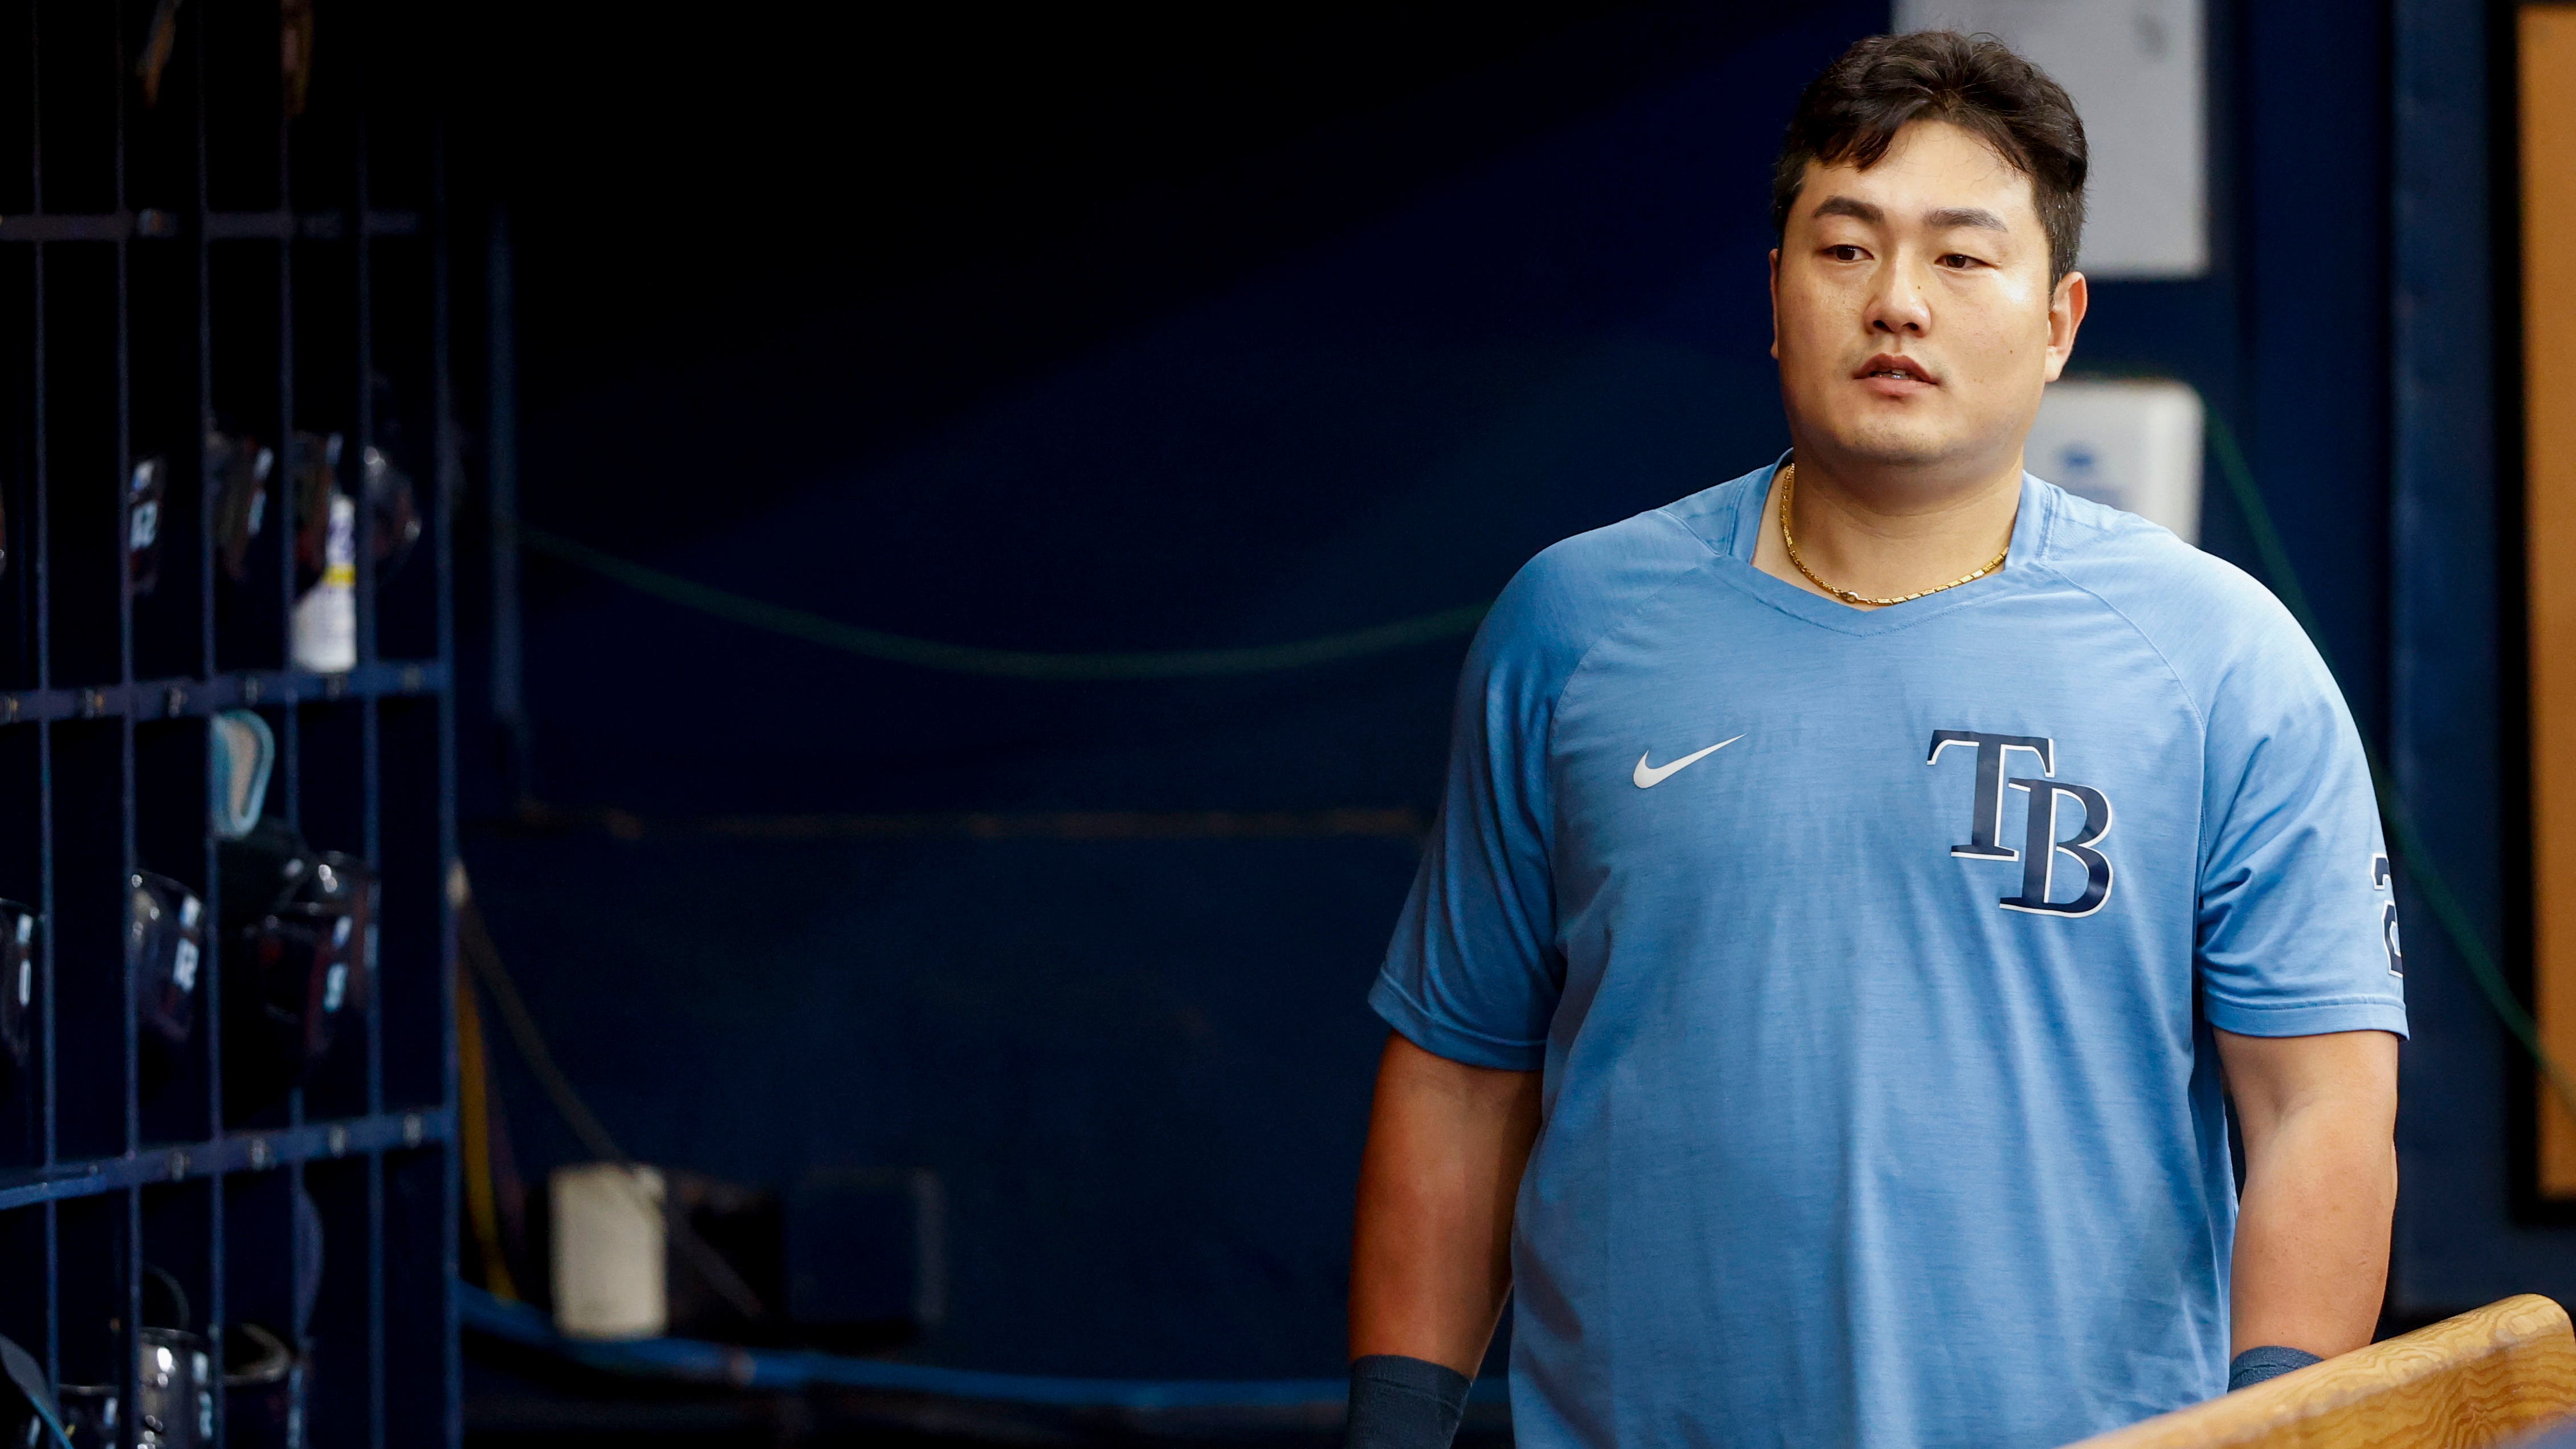 Rays' Choi takes center stage in Big League after long journey - The Korea  Times